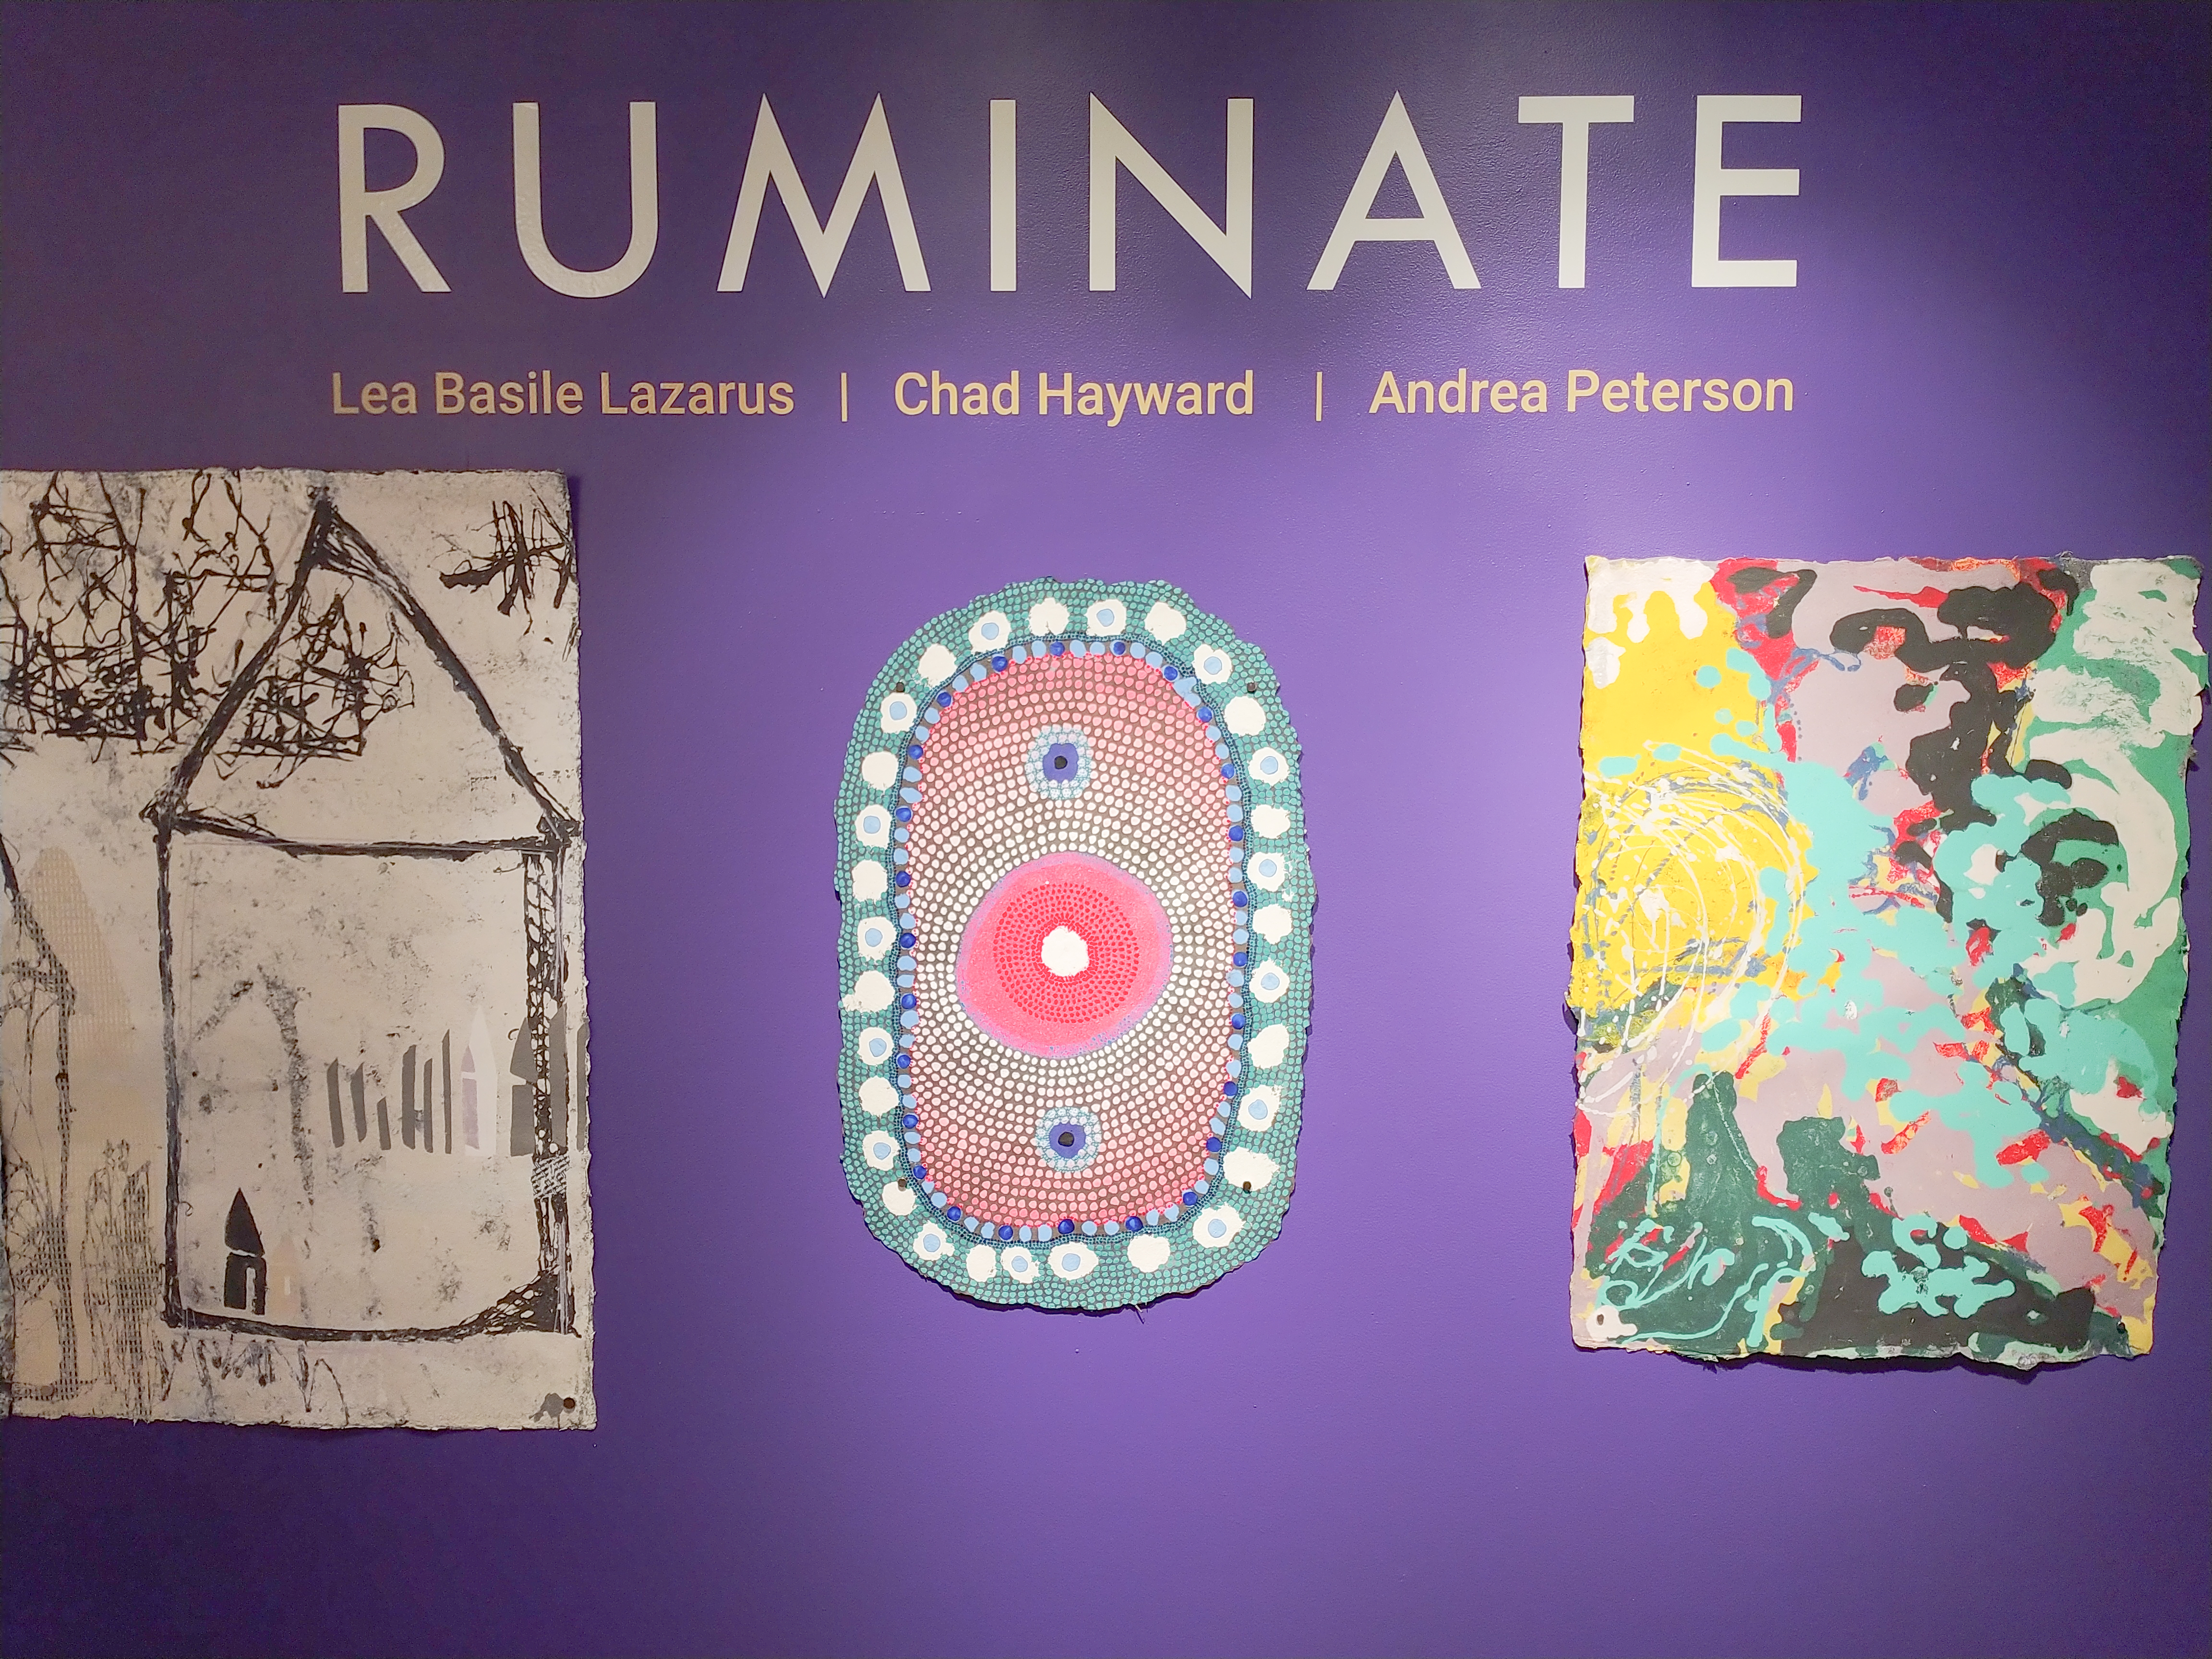 Purple Title Wall at the entrance of the gallery. The wall says Ruminate in white vinyl letters with the artists' names in yellow underneath. Below the title and artists names are one work by each artist. Lea Basile-Lazarus has a dipytch of two line drawn houses on a white background. Chad Haywards work is an oval of paper with a white dot at its center. the white dot rests on a larger red dot and the red dot floats in a sea of small dots organized via gradation from white to red all of this is circled by blue and white dots on a green base sheet. Andrea Peterson shows an abstract pulp painting with a large patch of yellow in the upper left corner, a bright turquoise shooting out diagonally from the yellow and large swirls of white, green, and pink.